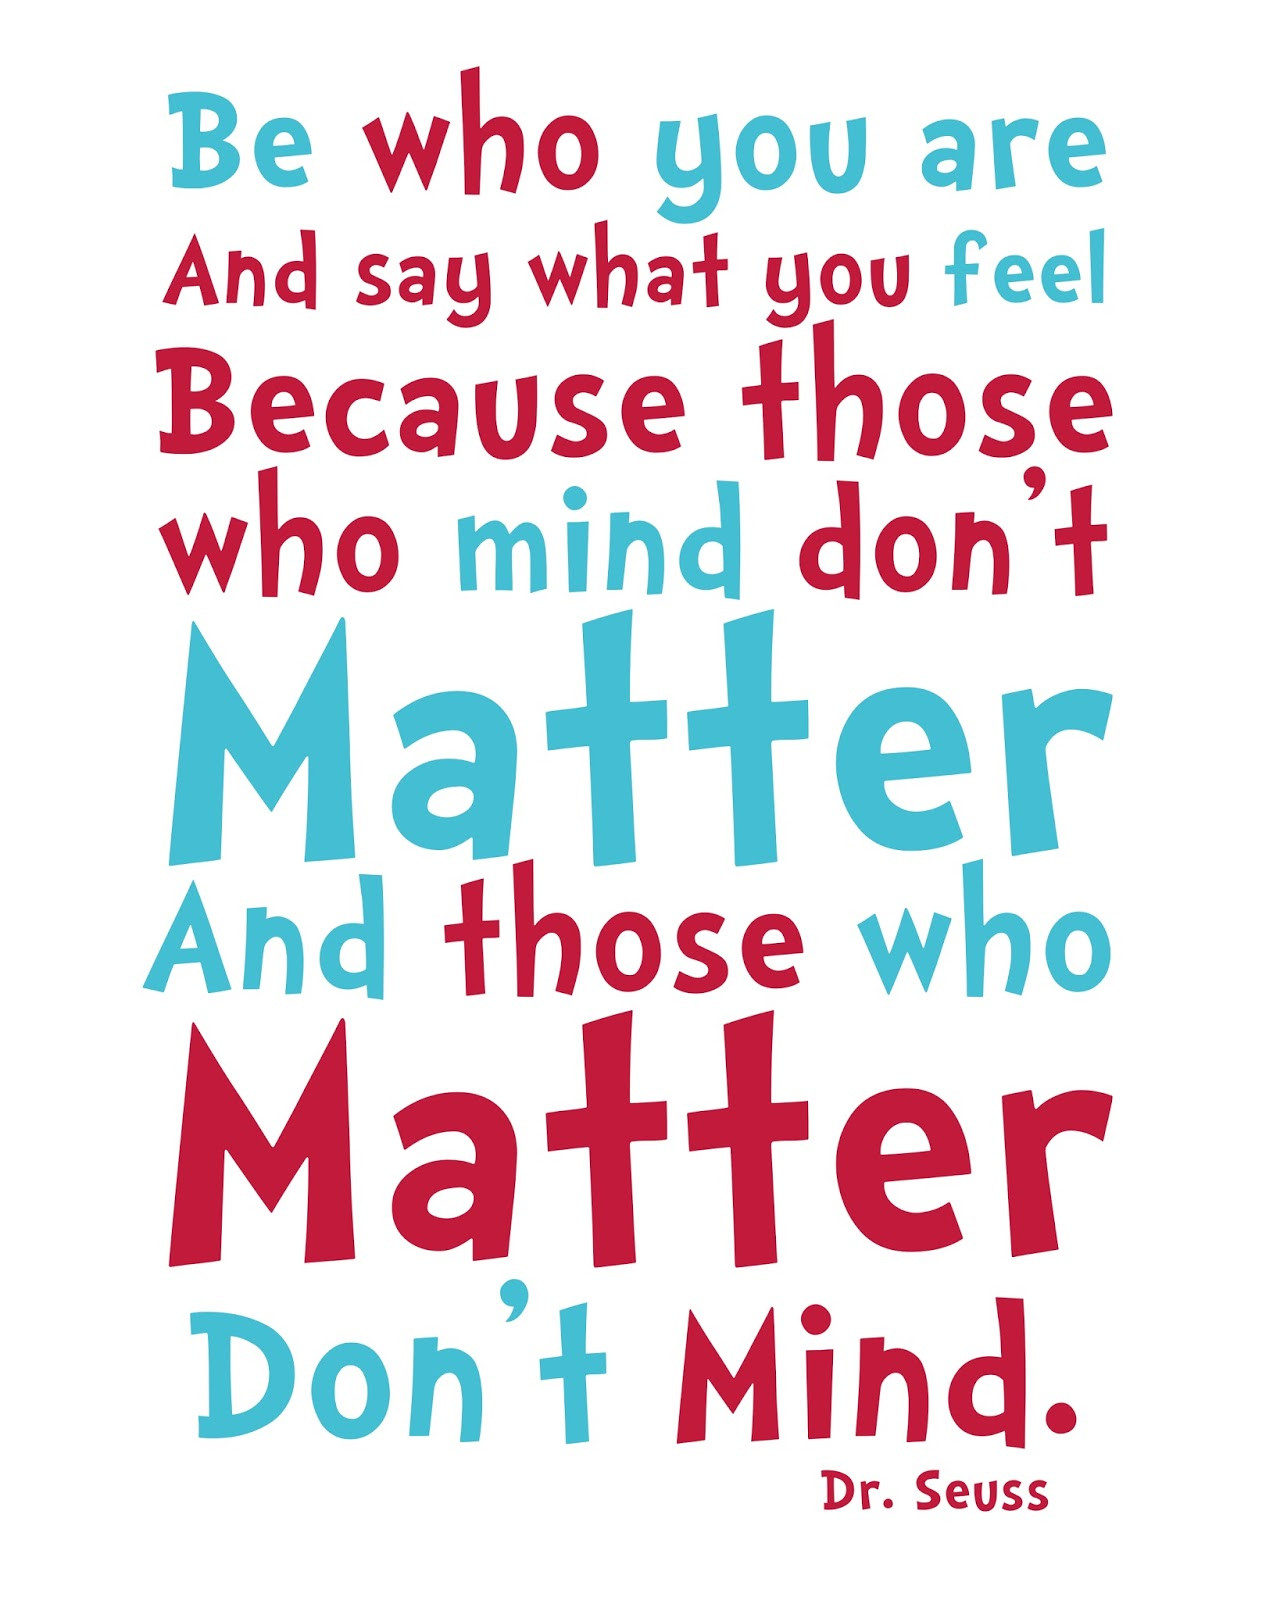 Inspirational Quote Dr Seuss
 dr suess you silly goose